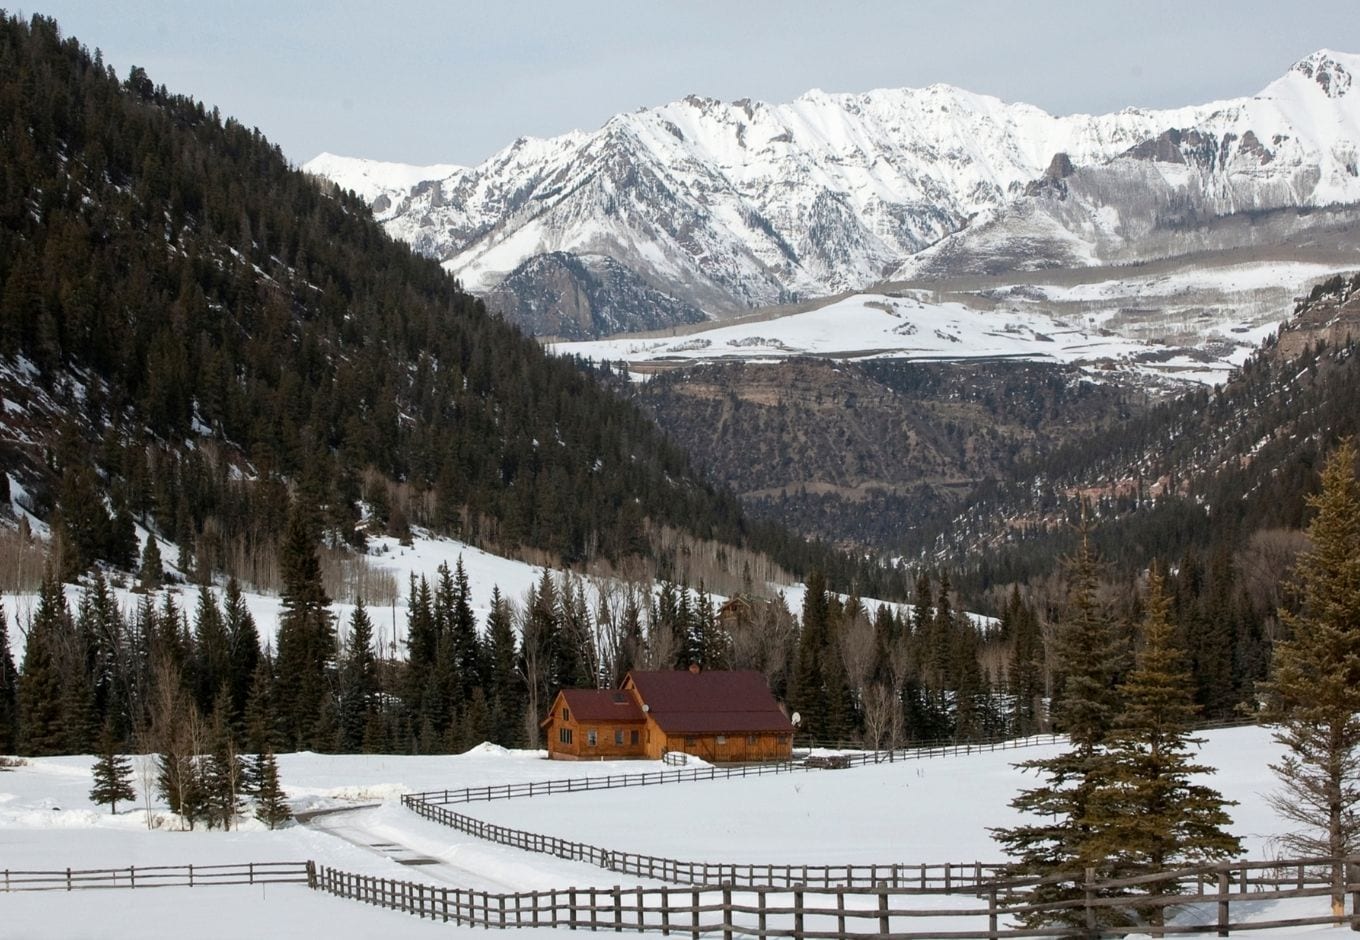 View of the snowy mountains of Telluride, in Colorado.